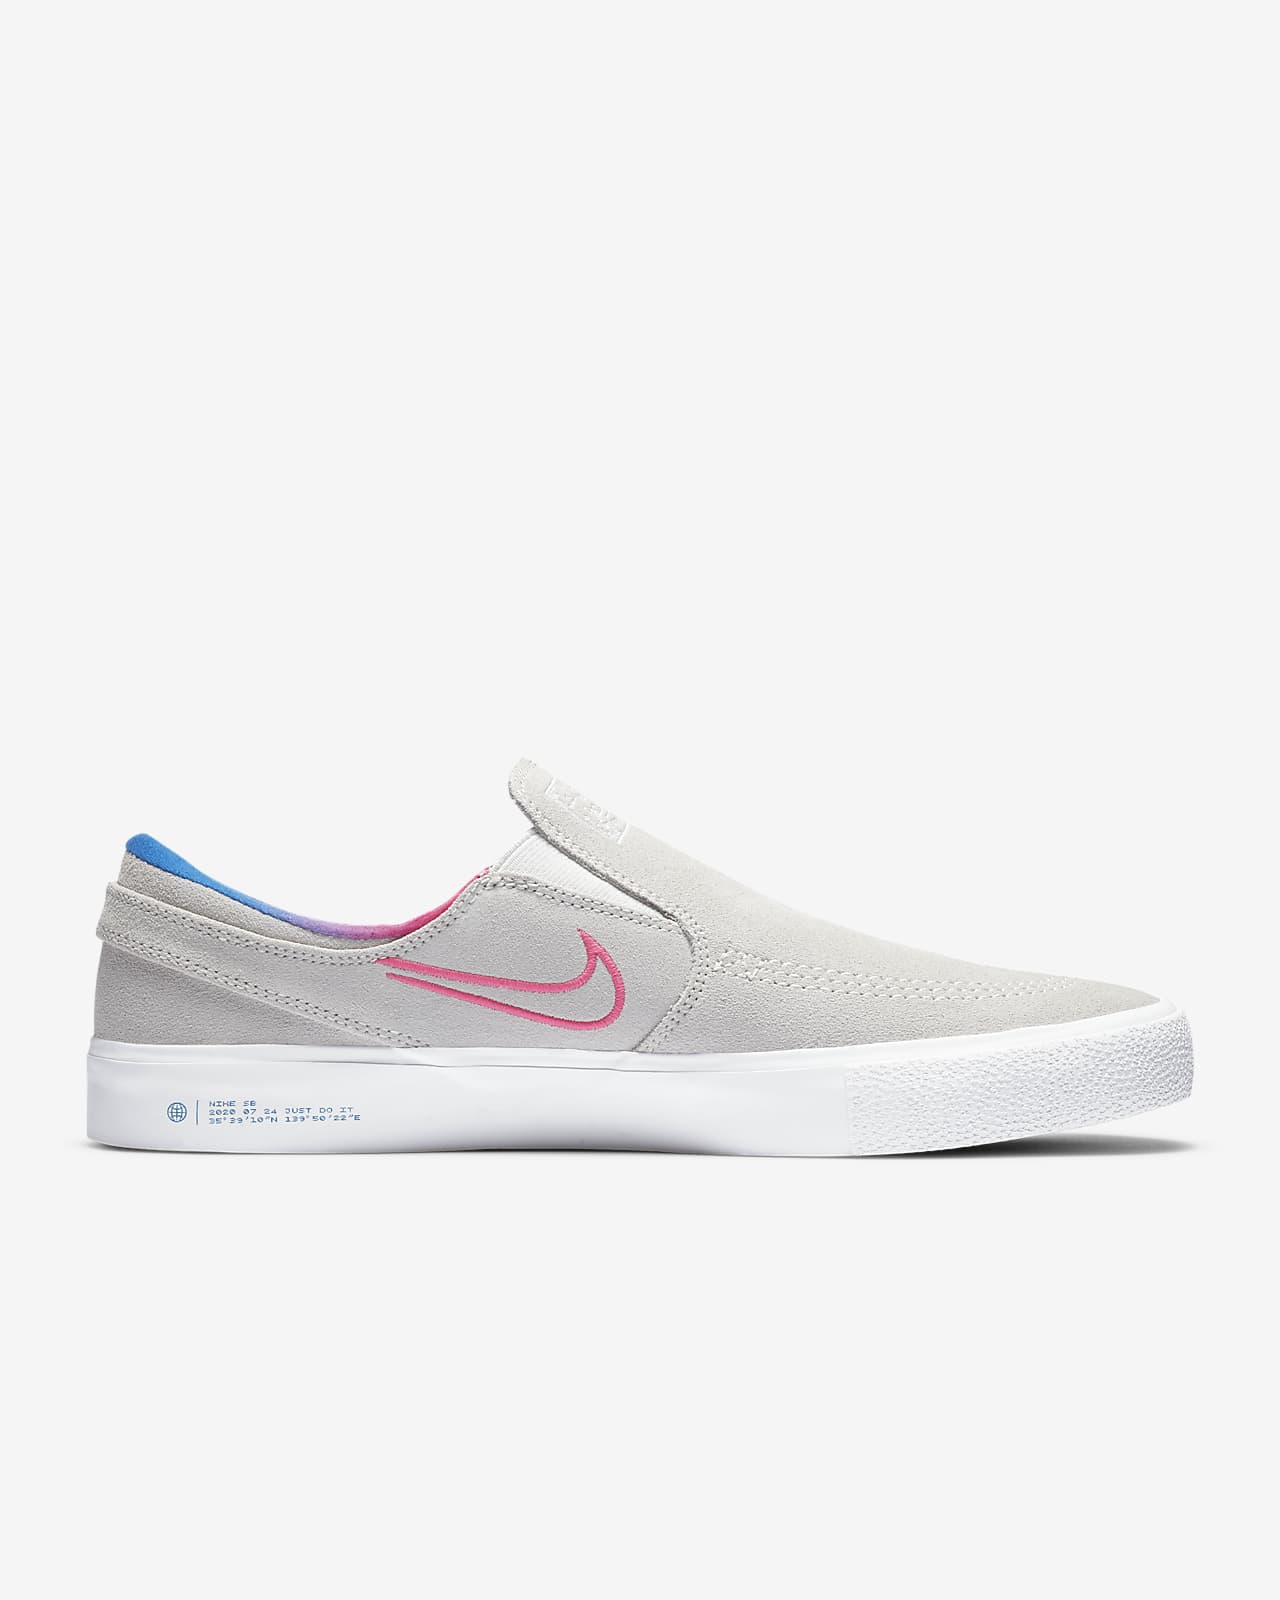 nike just do it slip on shoes